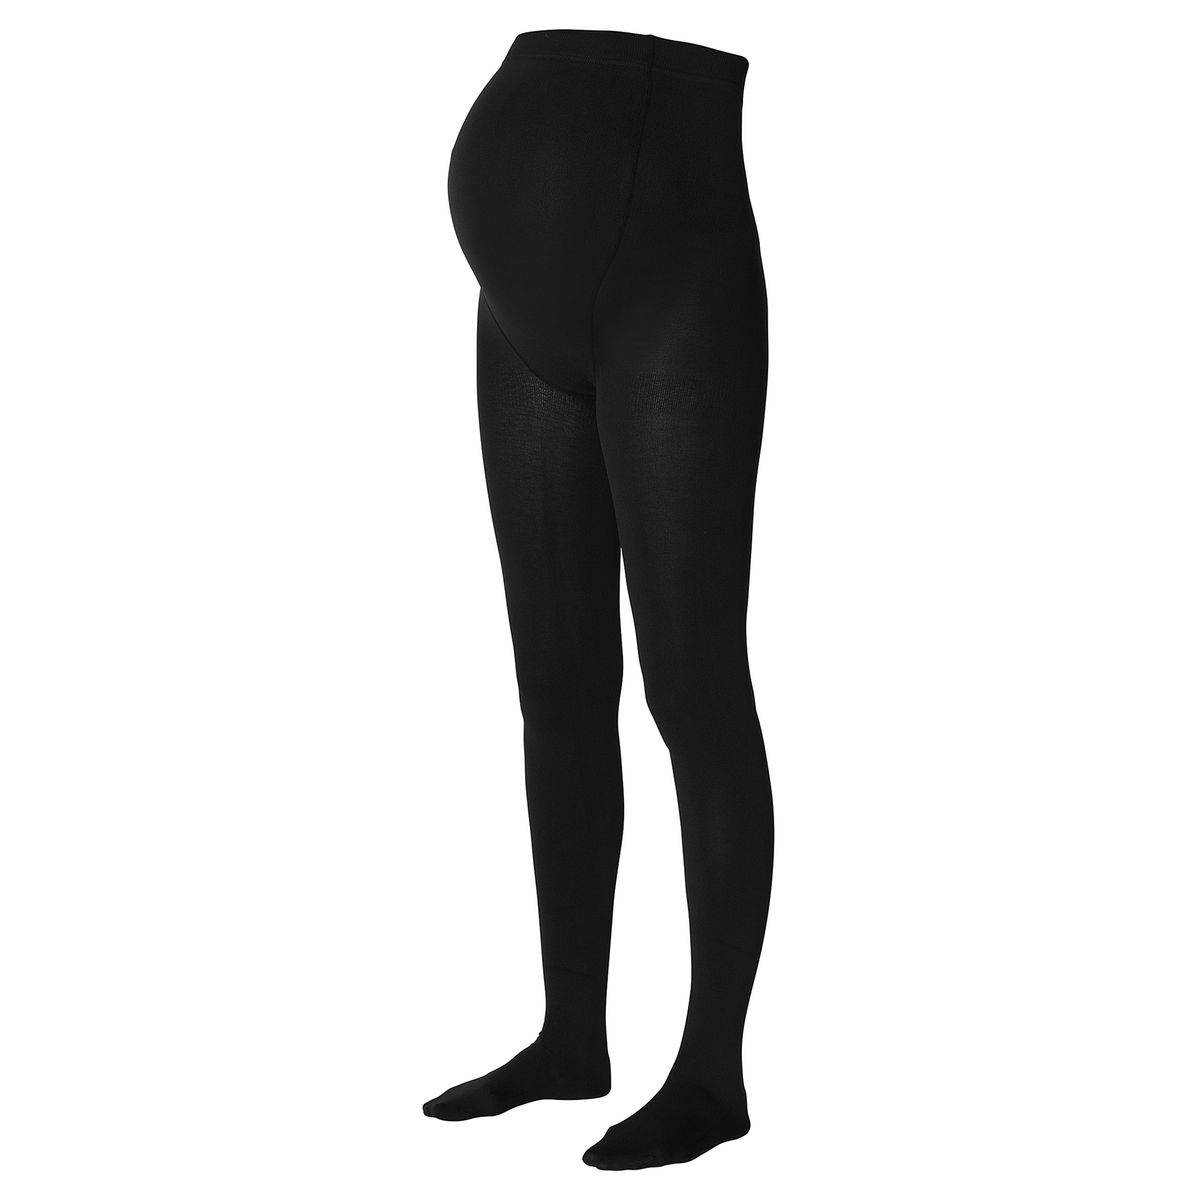 Noppies Collant 2-Pack Maternity tights 20 Den - Black